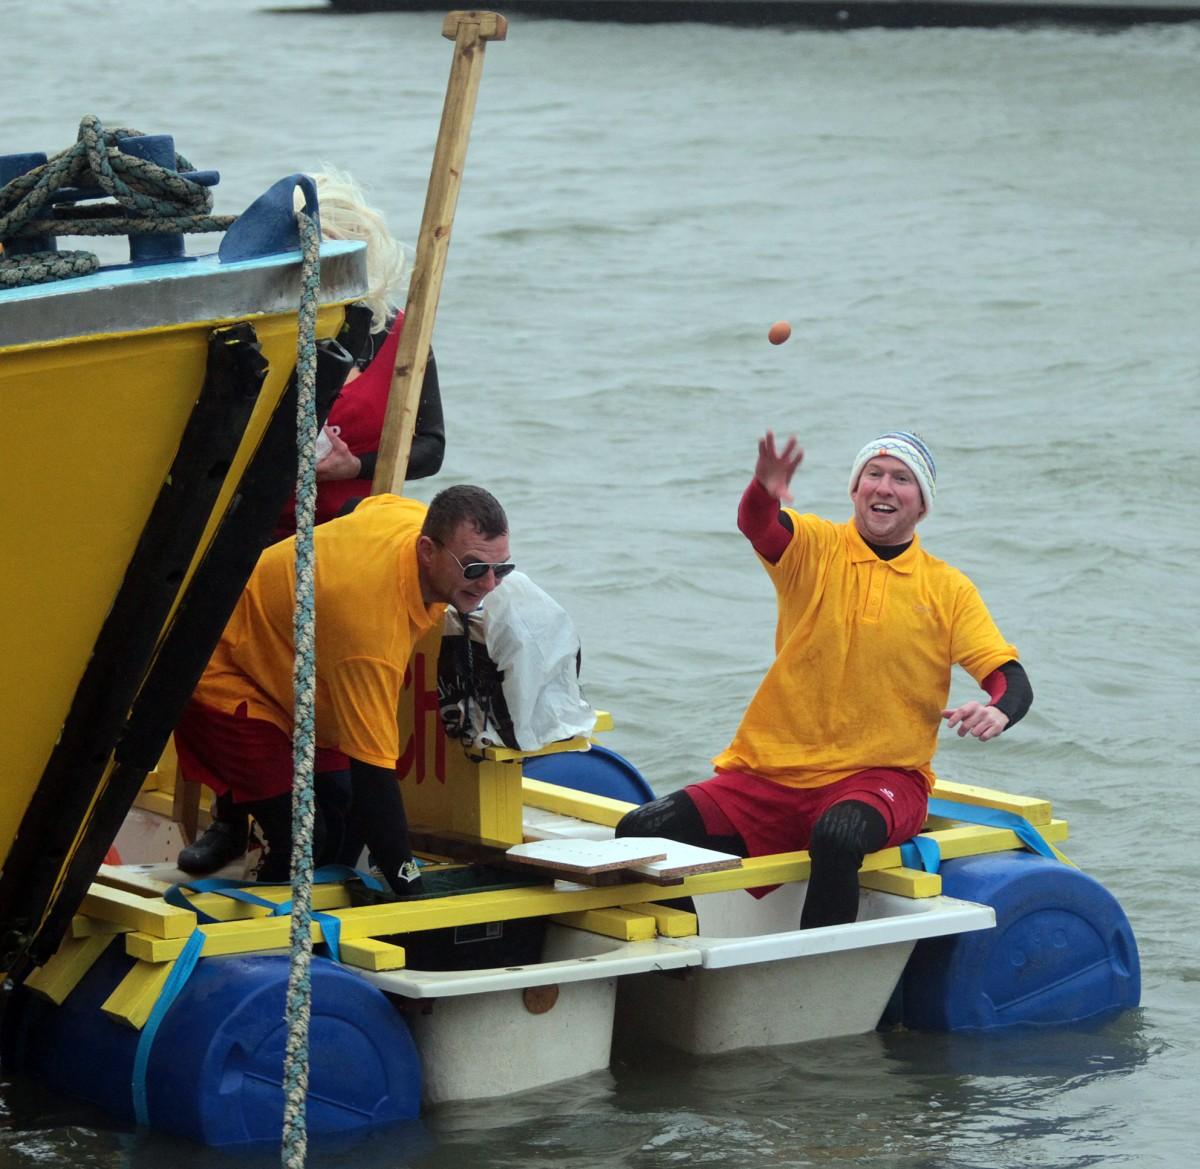 Pictures of the annual Bath Tub Race at Poole Quay on New Year's Day 2014